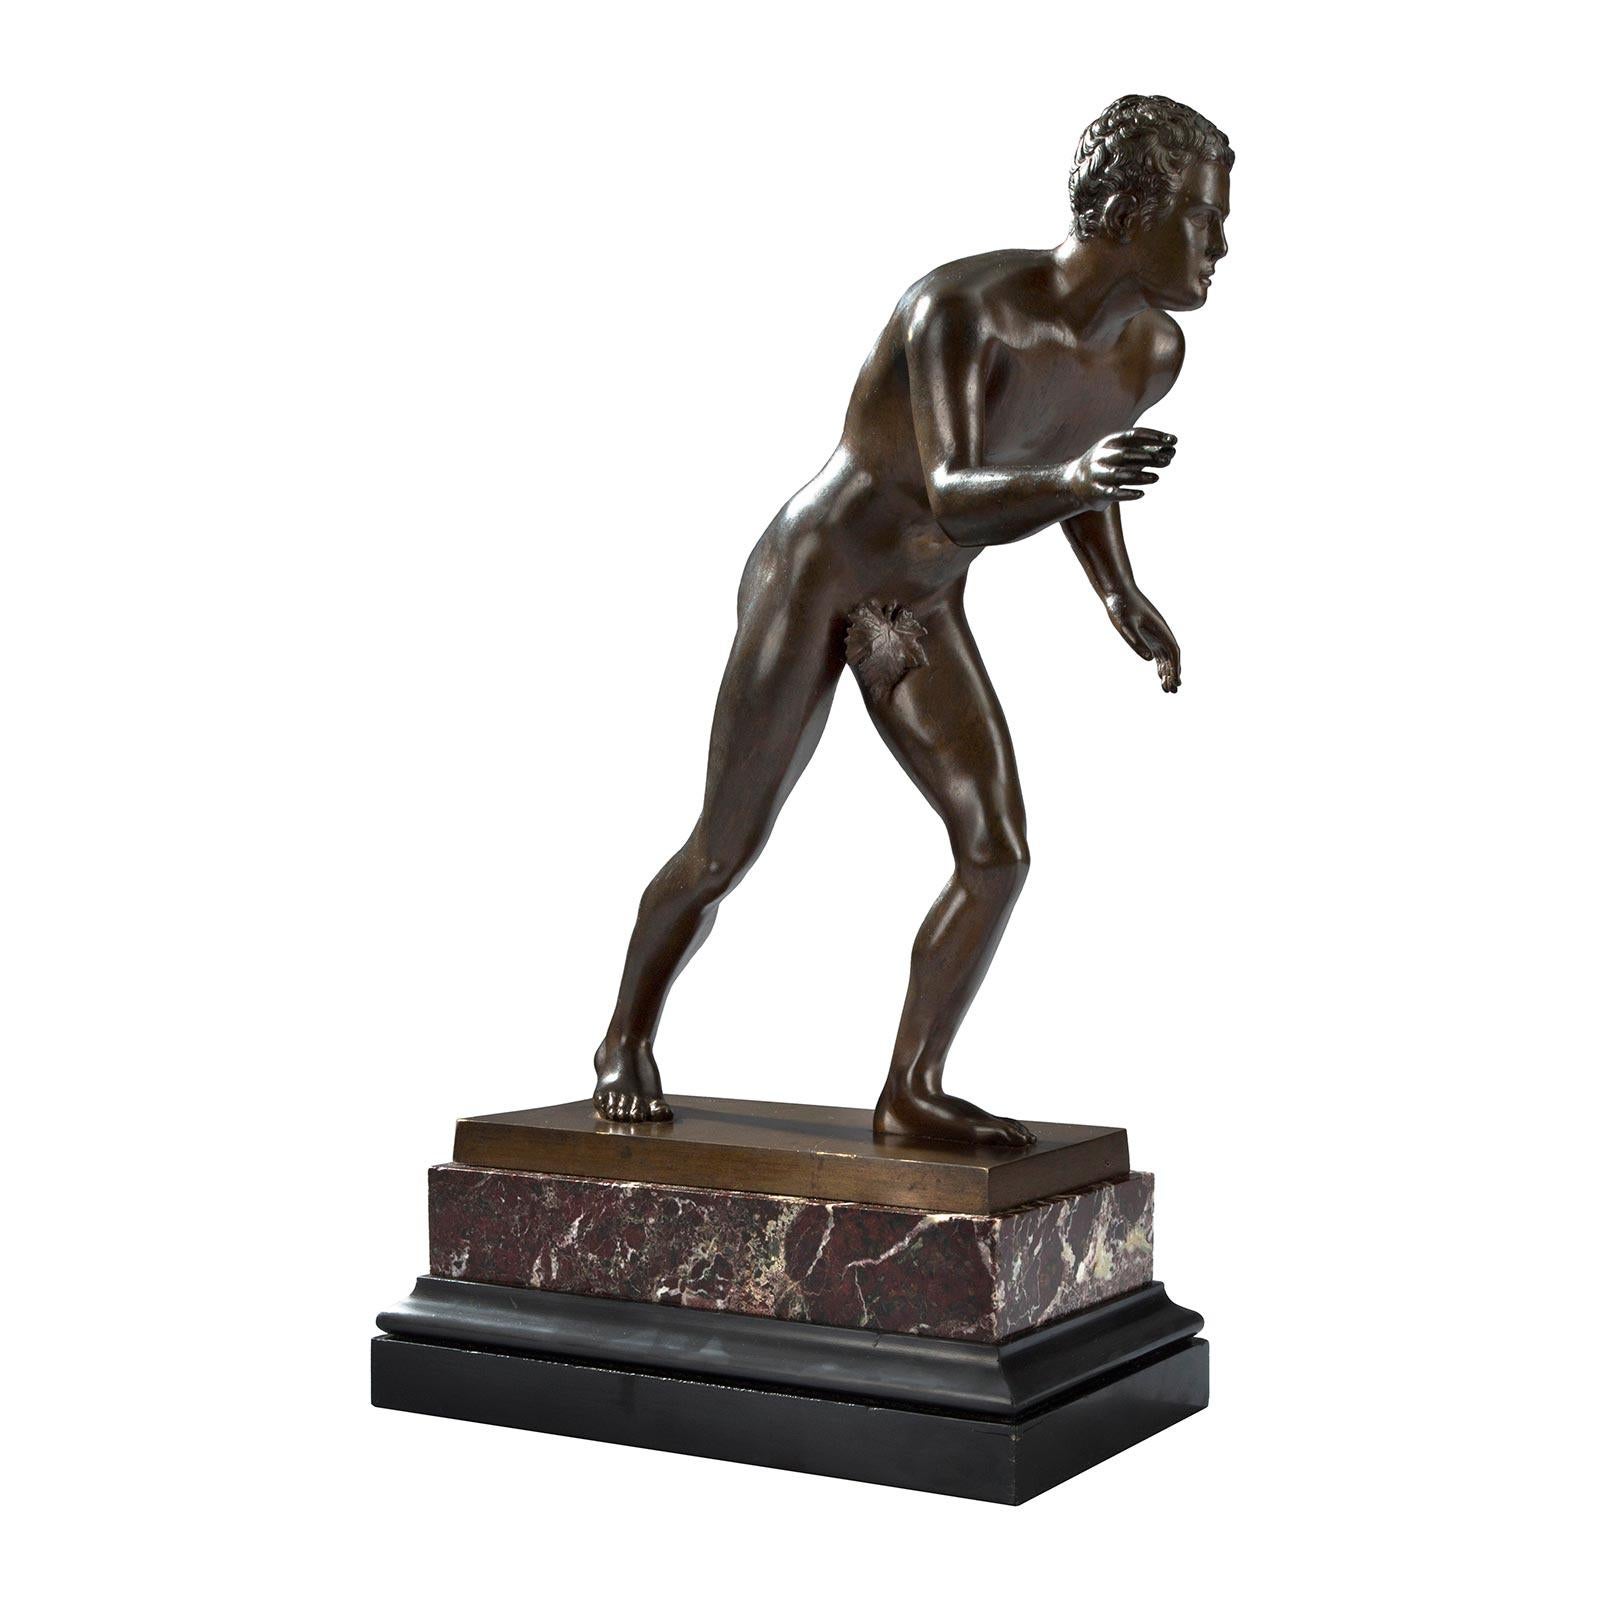 A handsome Italian 19th century Grand Tour period patinated bronze of a Roman athlete. The bronze is raised by a rectangular mottled edge black Belgian marble base below a thick rectangular Rosso Levanto support. The athlete is leaning forwards with